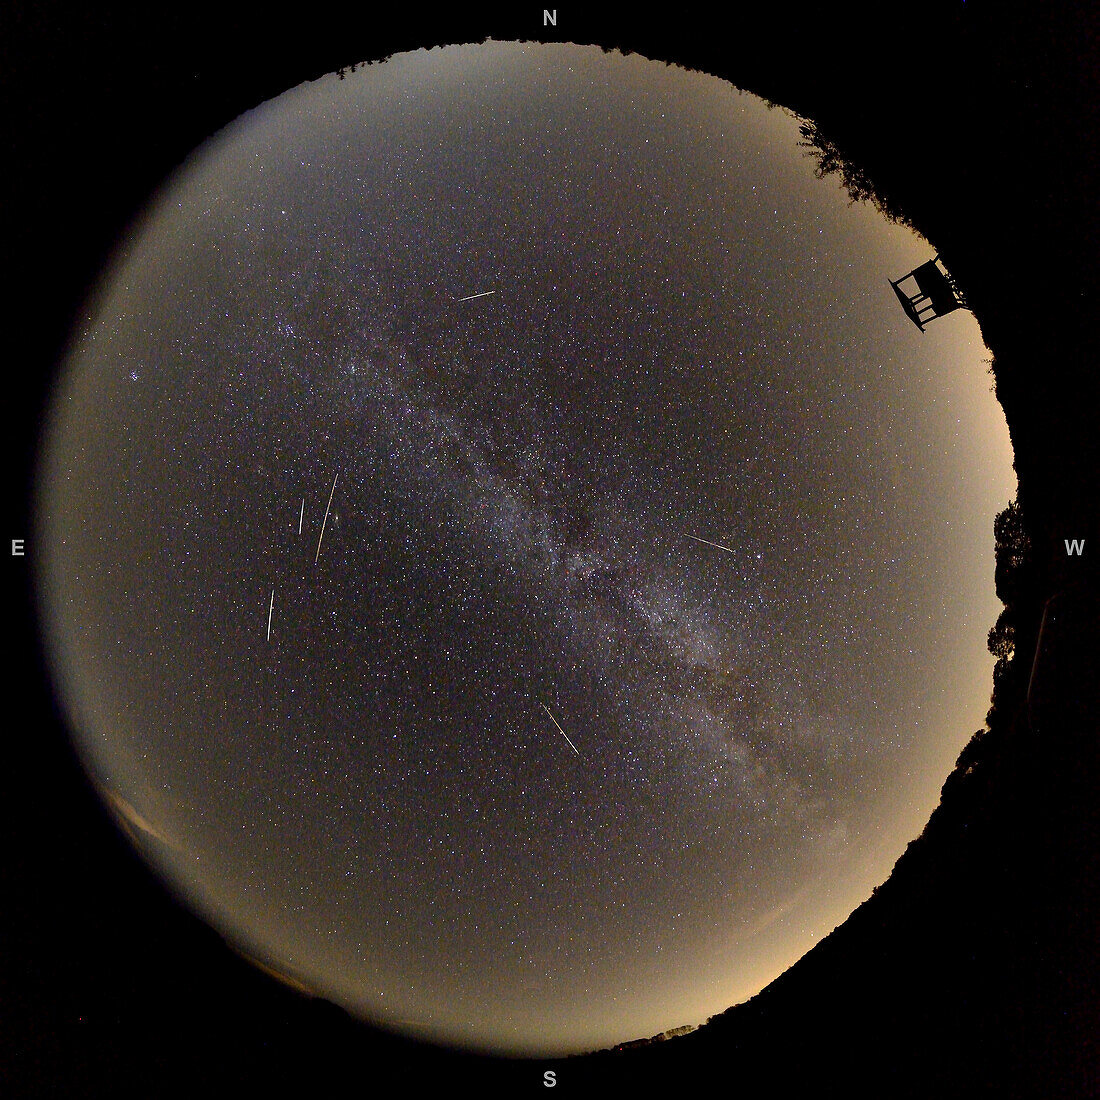 Perseid meteor shower tracks and the Milky Way